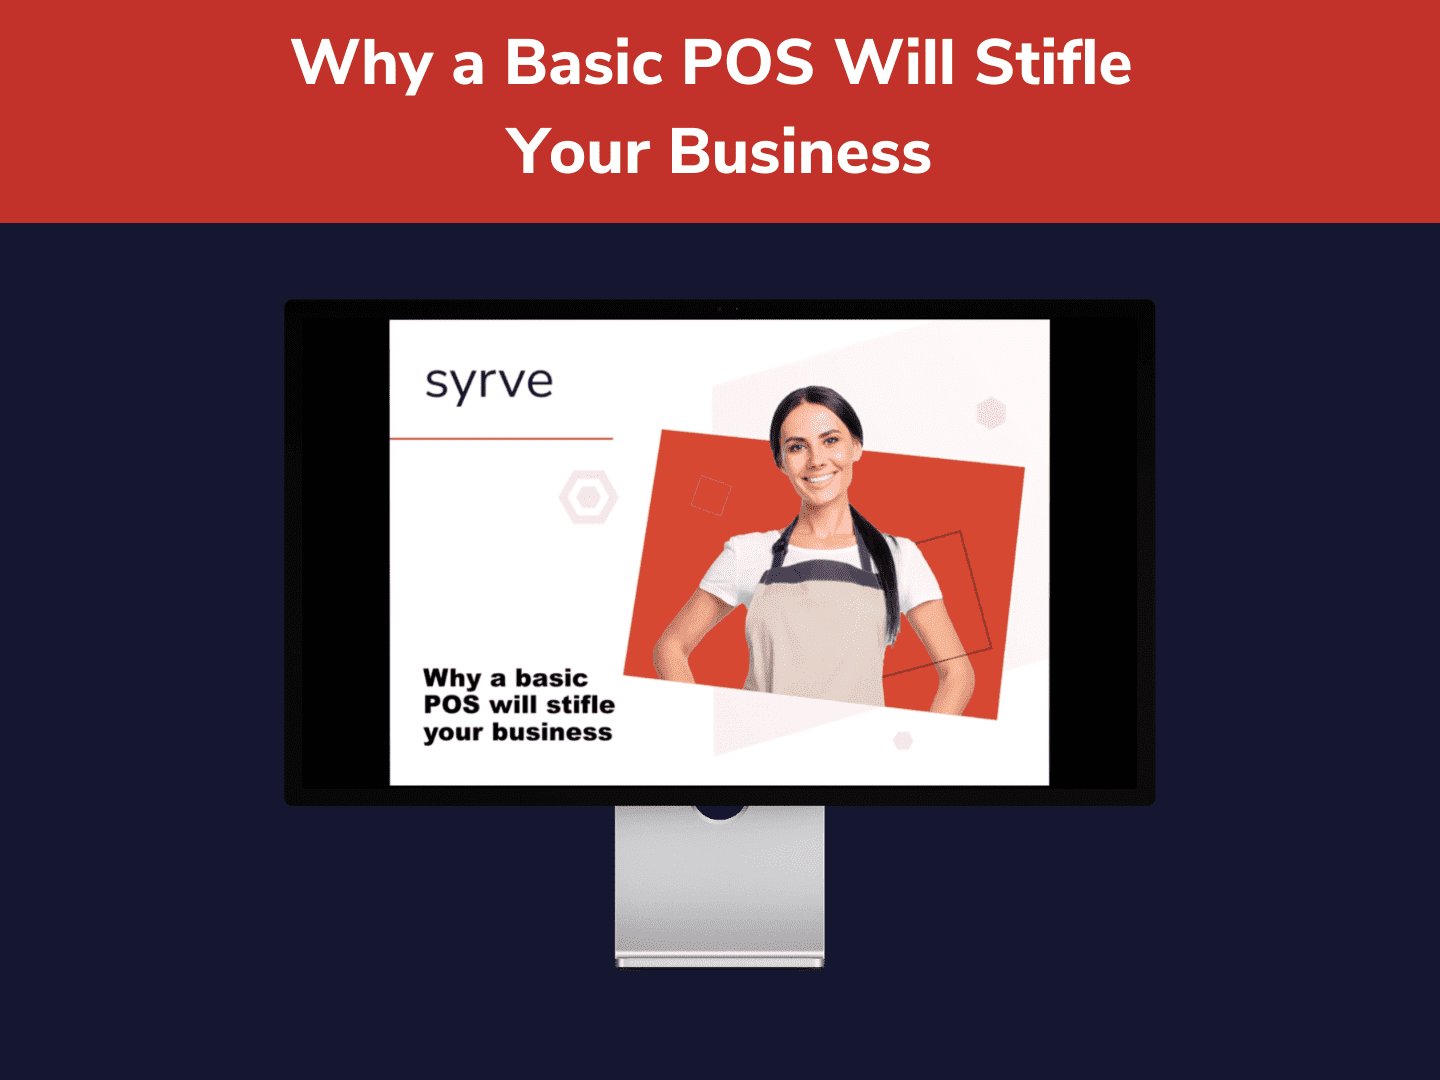 Why a Basic POS Will Stifle Your Business